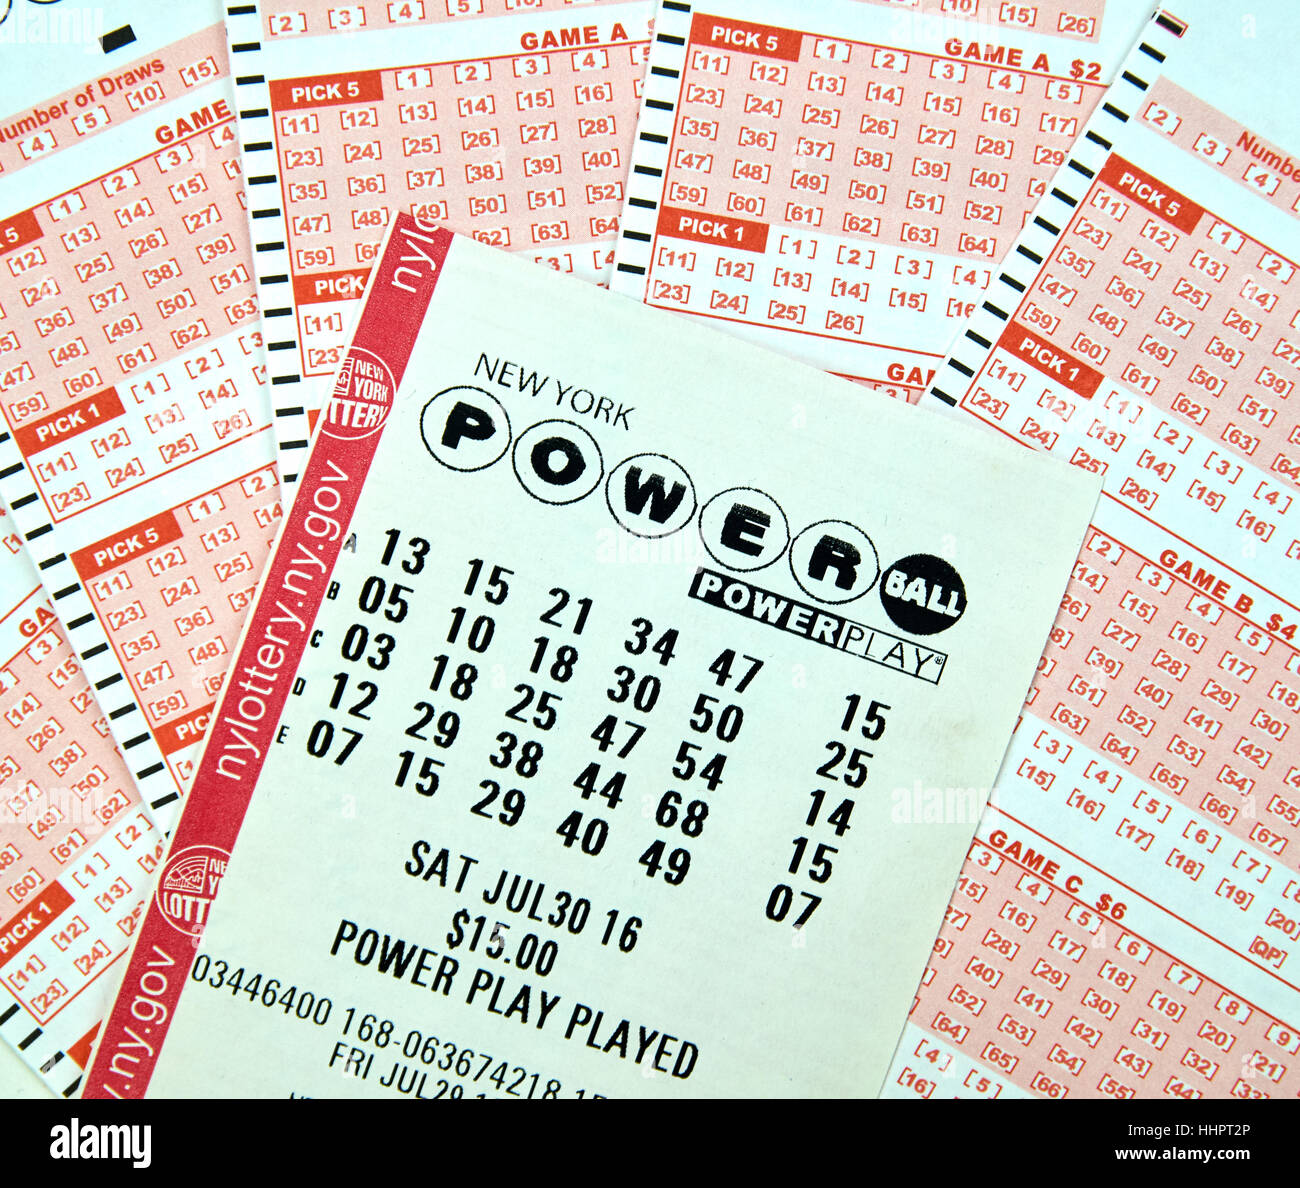 How to Play Powerball: 11 Steps (with Pictures) - wikiHow